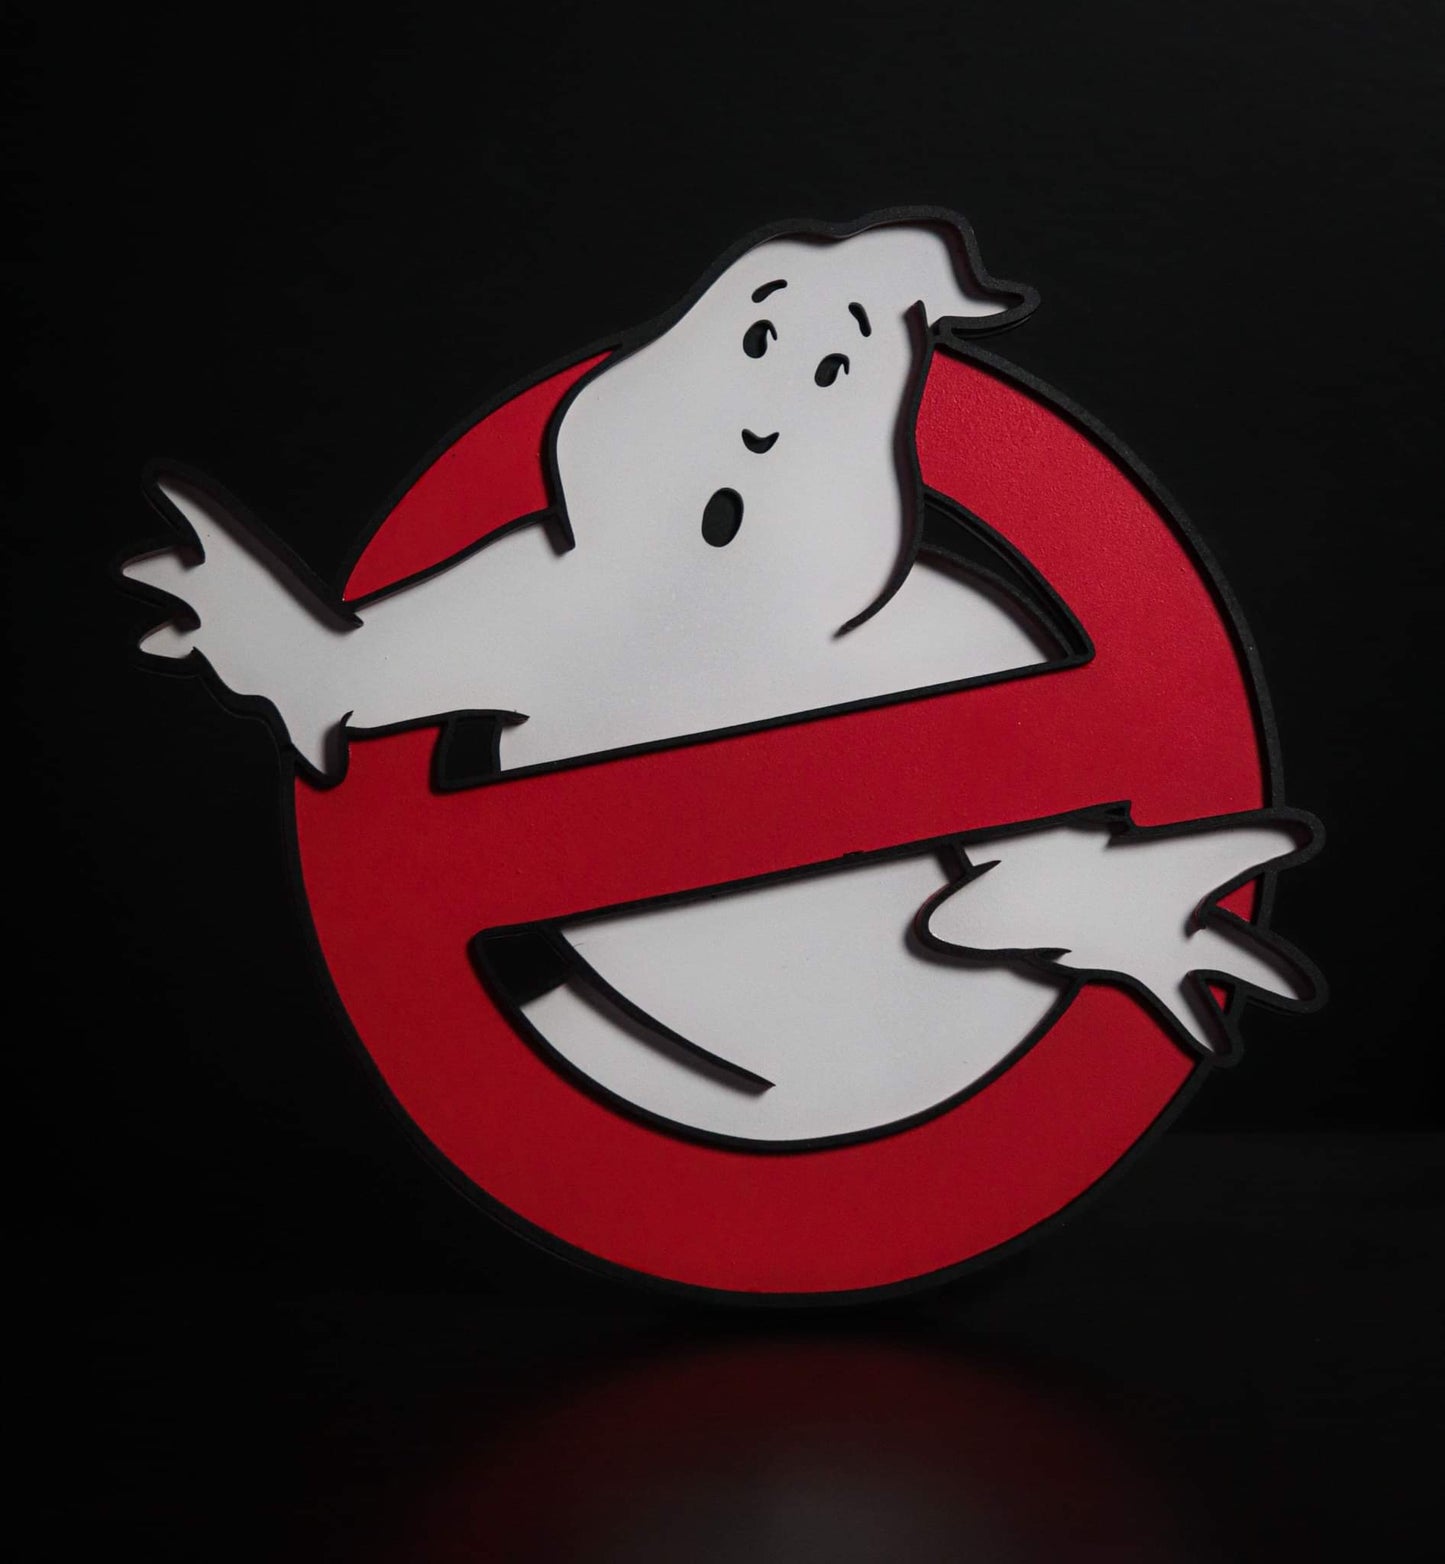 Say No to Ghosts!